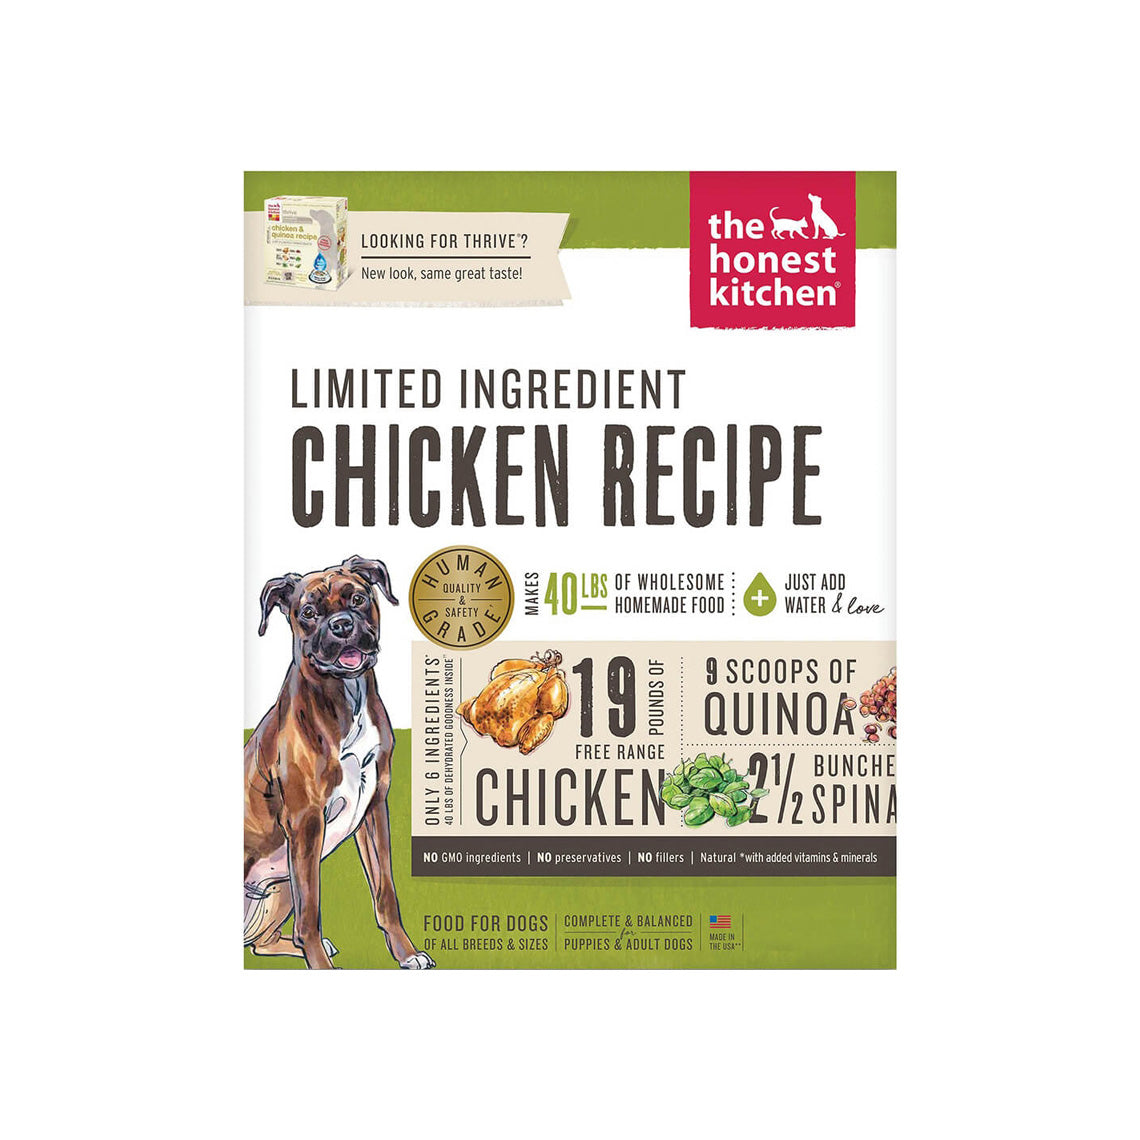 The Honest Kitchen Limited Chicken Recipe Dehydrated Dog Food